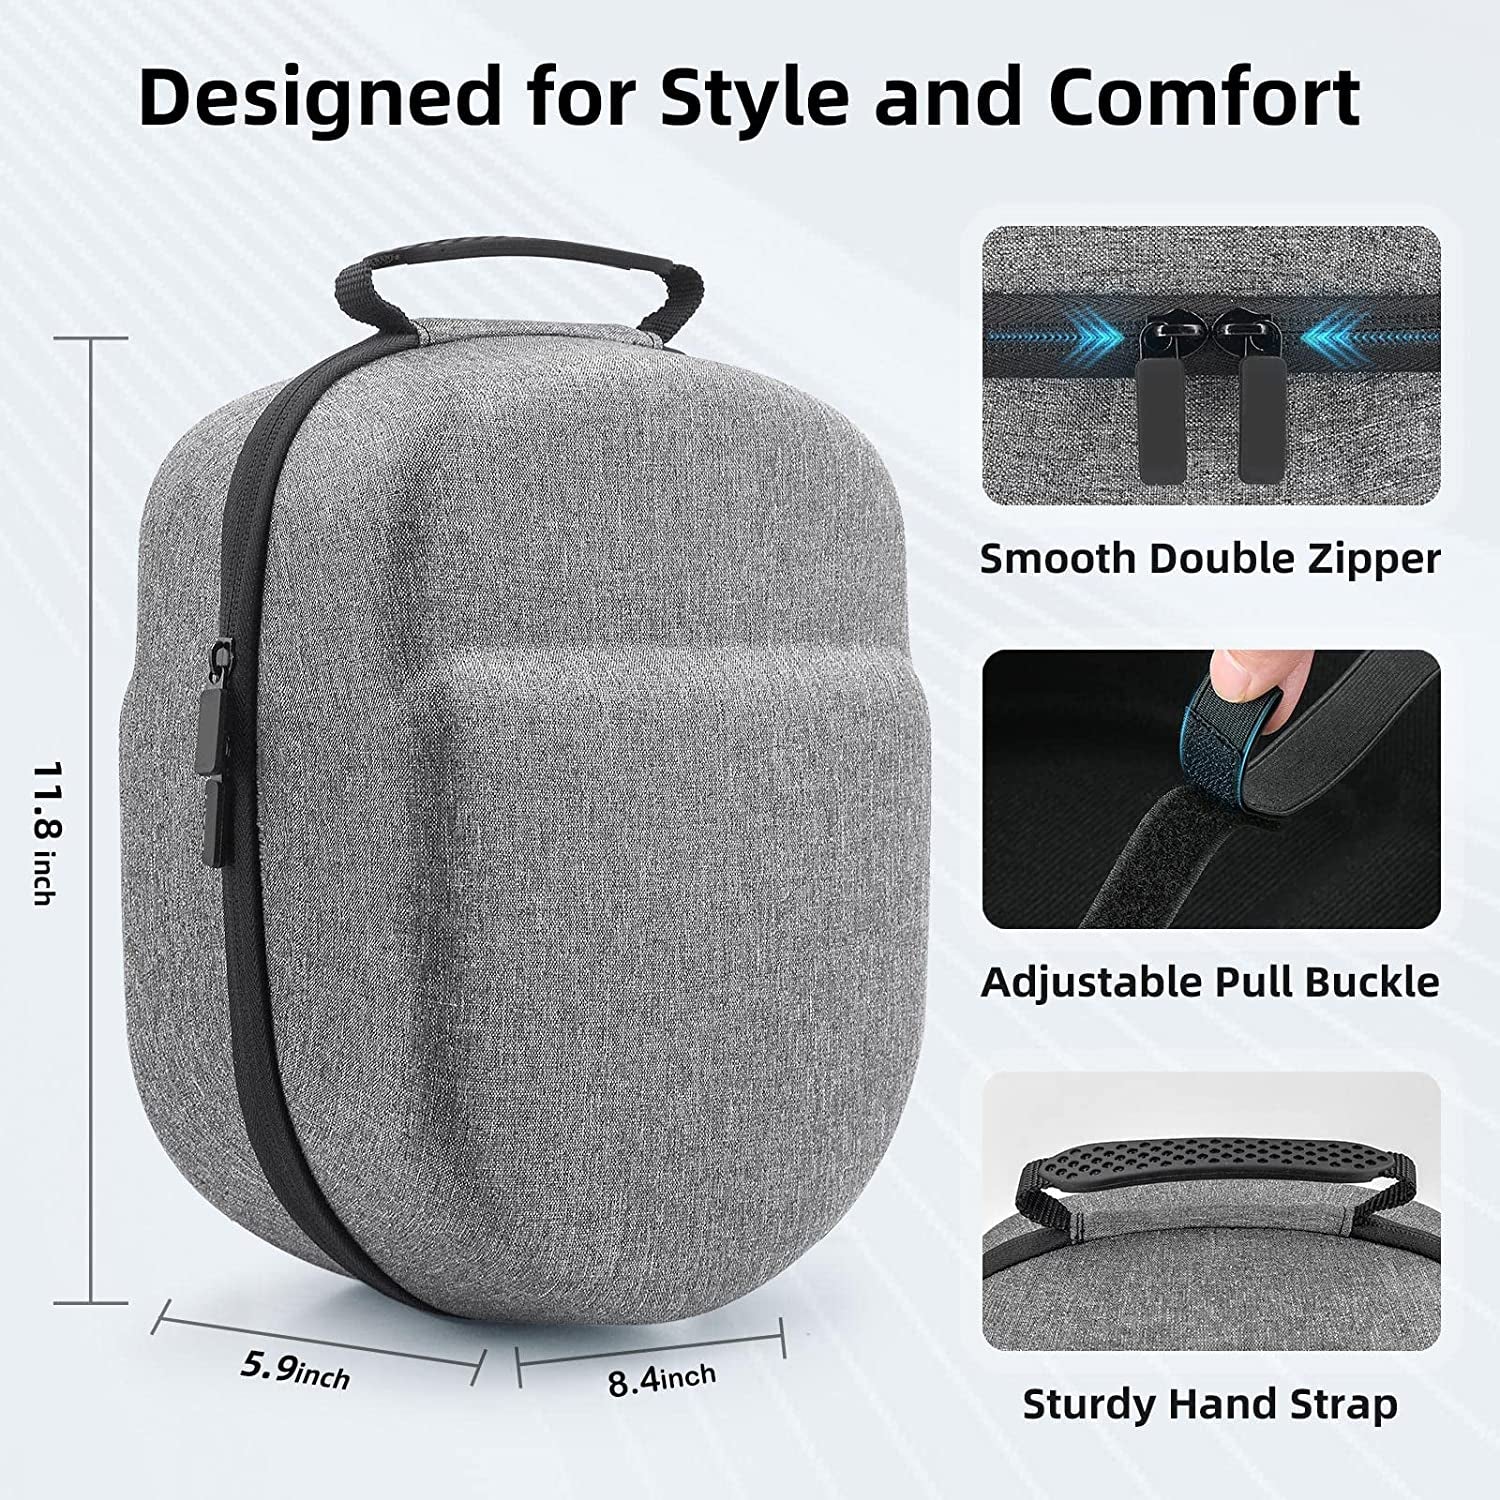 Retear Carrying Case for Meta/Oculus Quest 2 Accessories, Fits Elite Strap Battery Version and Kiwi Design/Bobovr Headstrap, Lightweight and Portable Full Protection for Travel and Home Storage